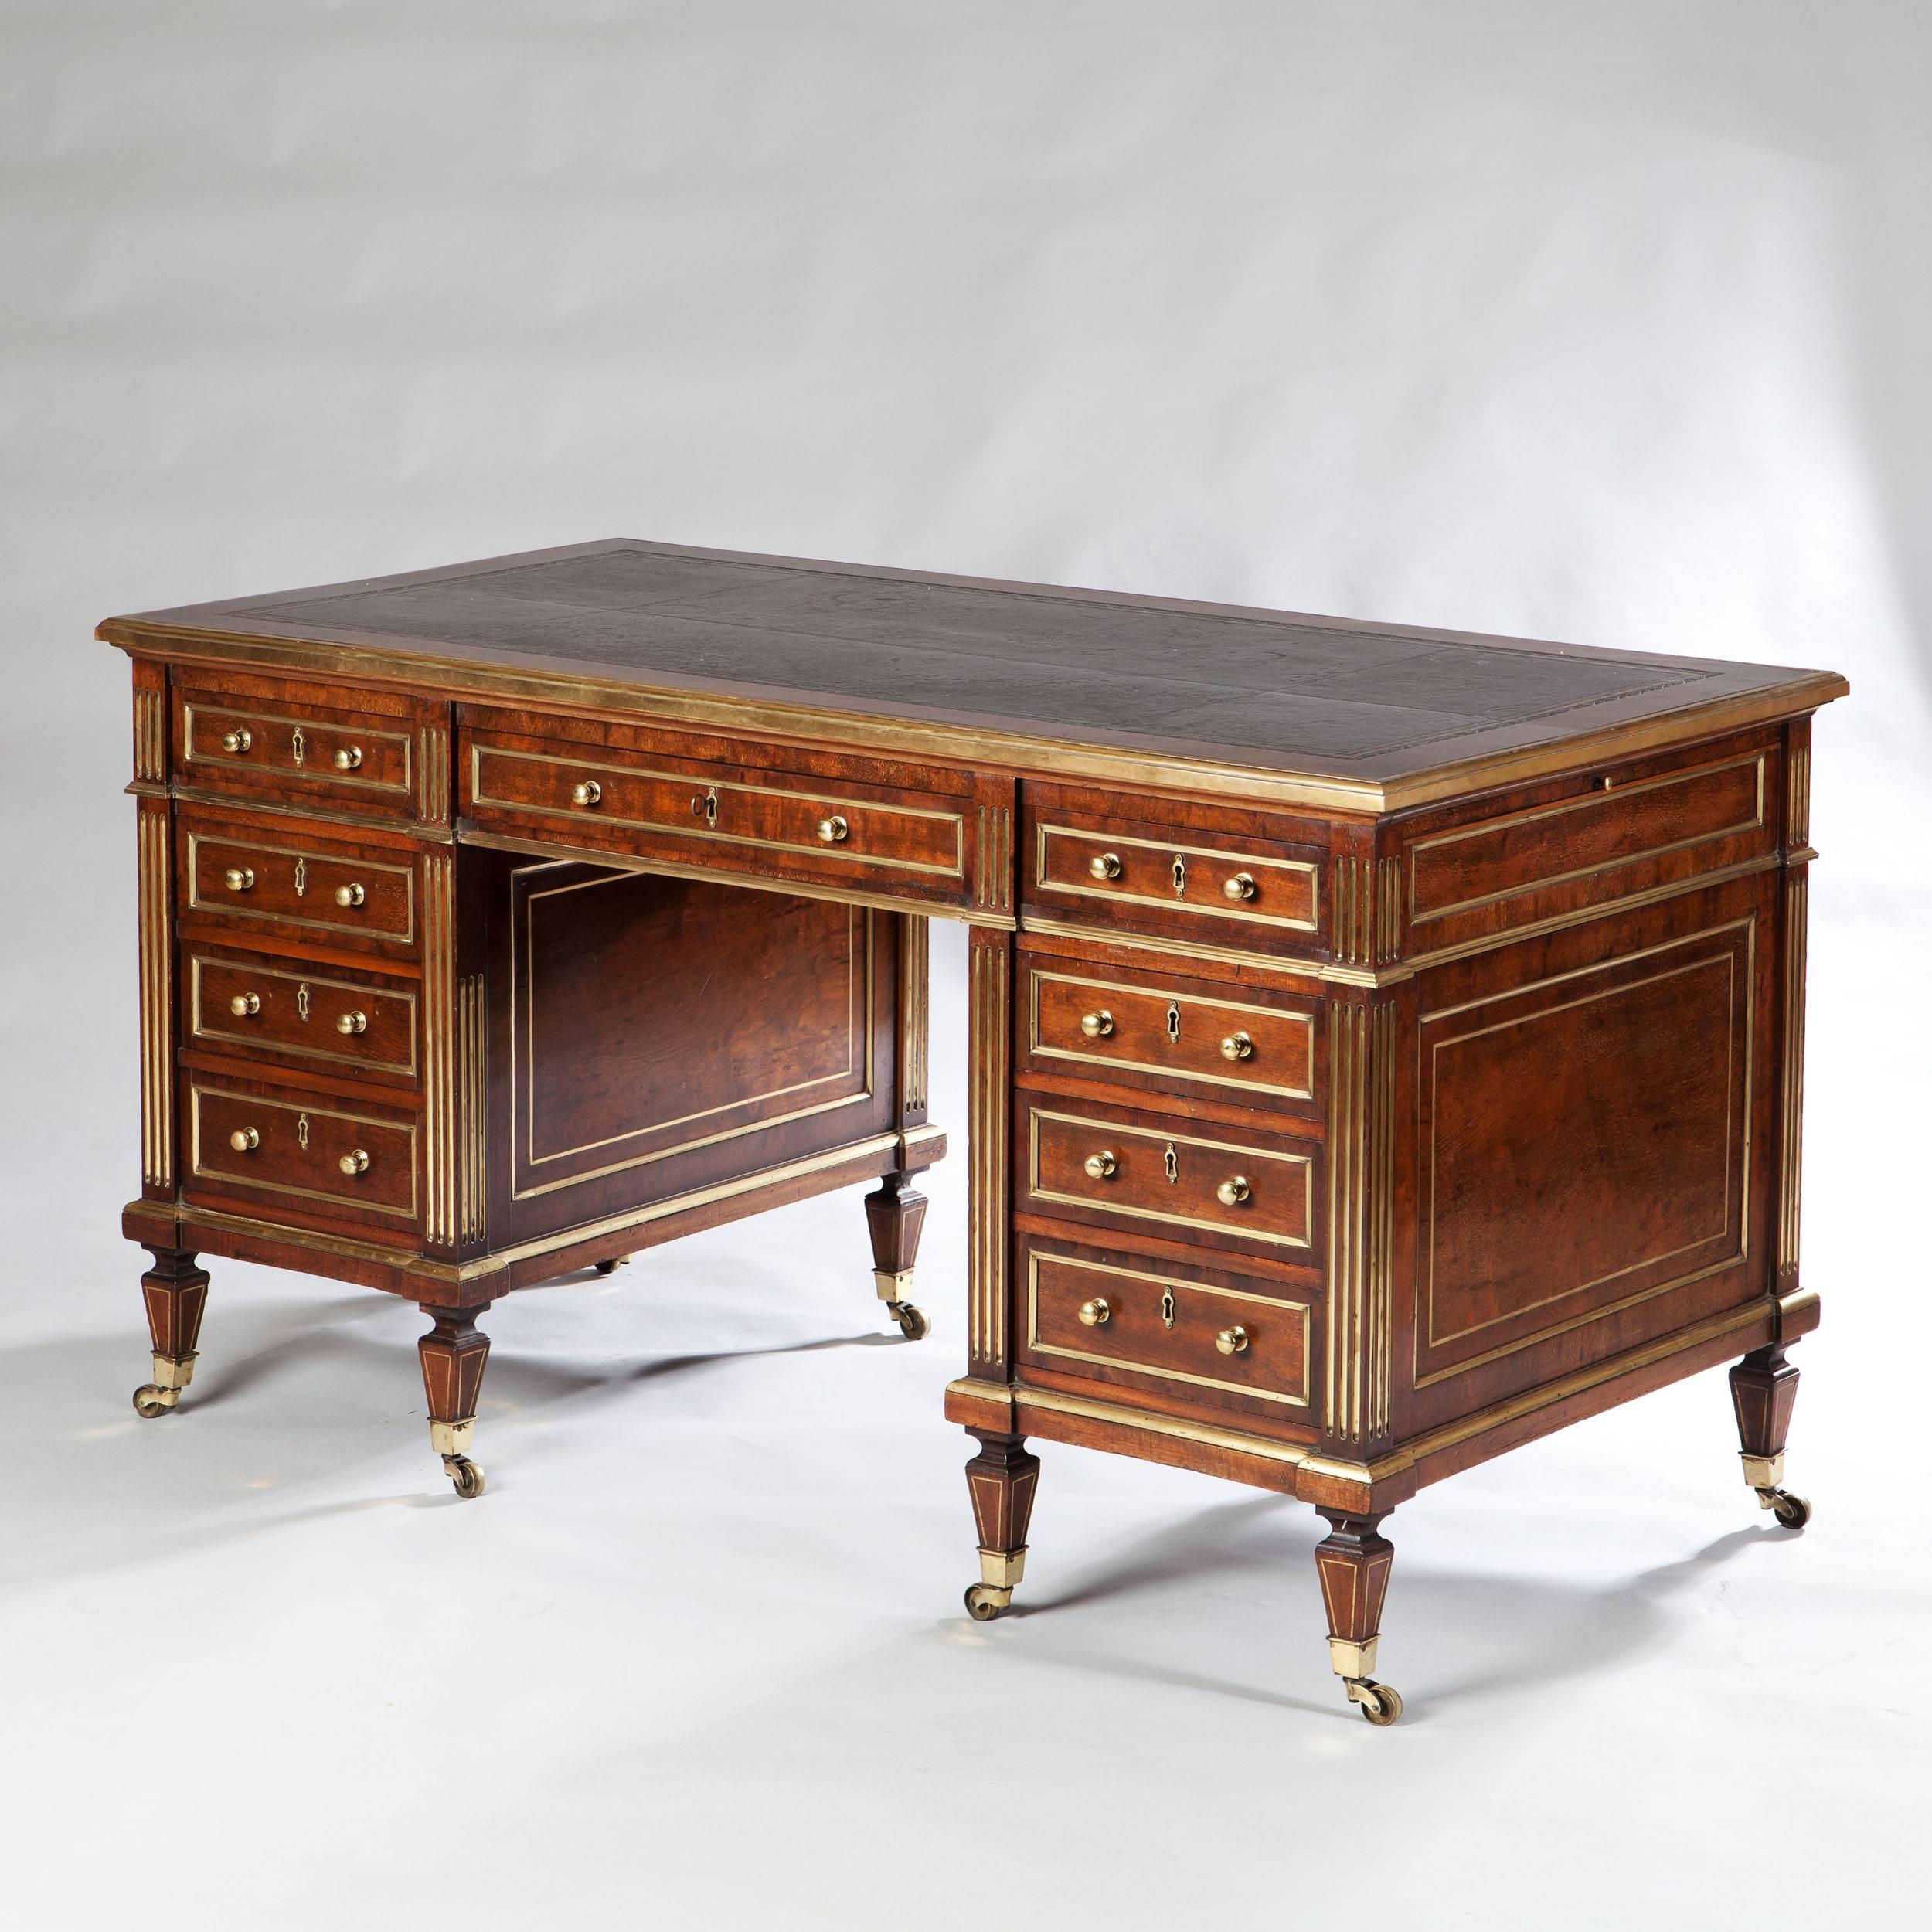 A very fine and good looking pedestal desk, the leather top with brass bound edges, above a bank of four drawers on each side with one central drawer, the back with dummy drawers. The whole raised on tapering legs on brass castors. The desk with two